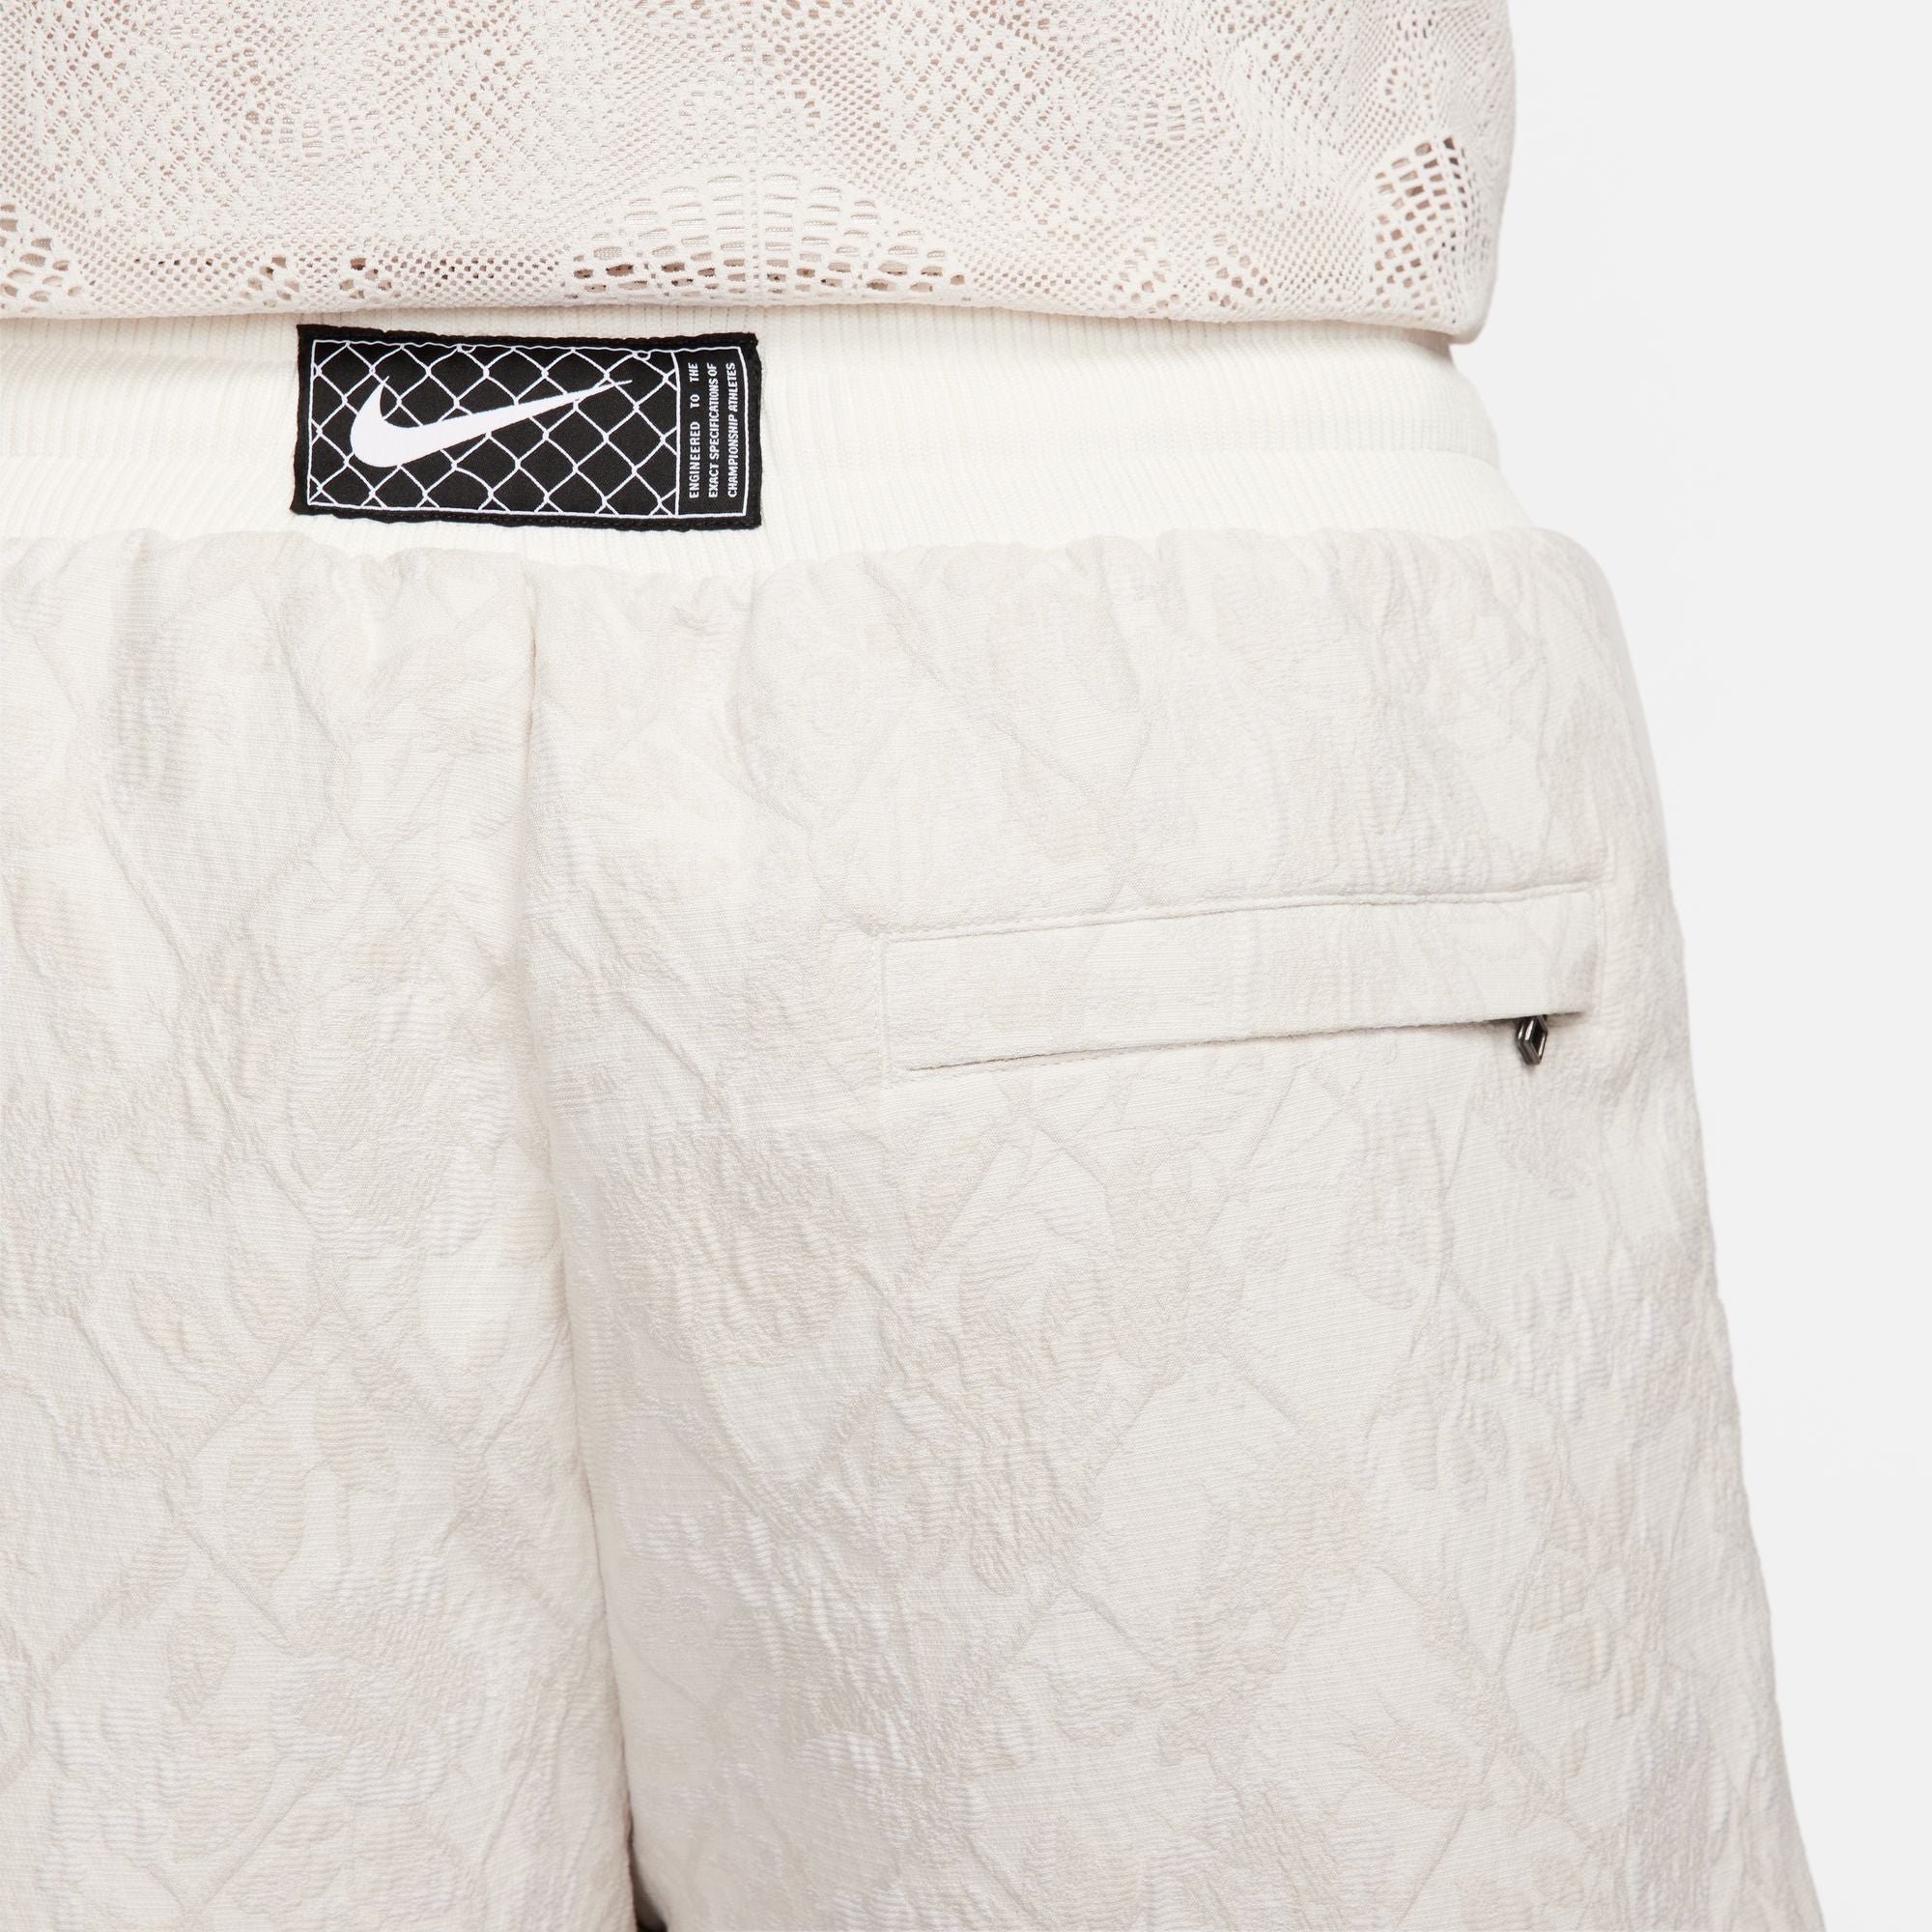 Nike Devin Booker Repel Basketball Shorts 'Pale Ivory'